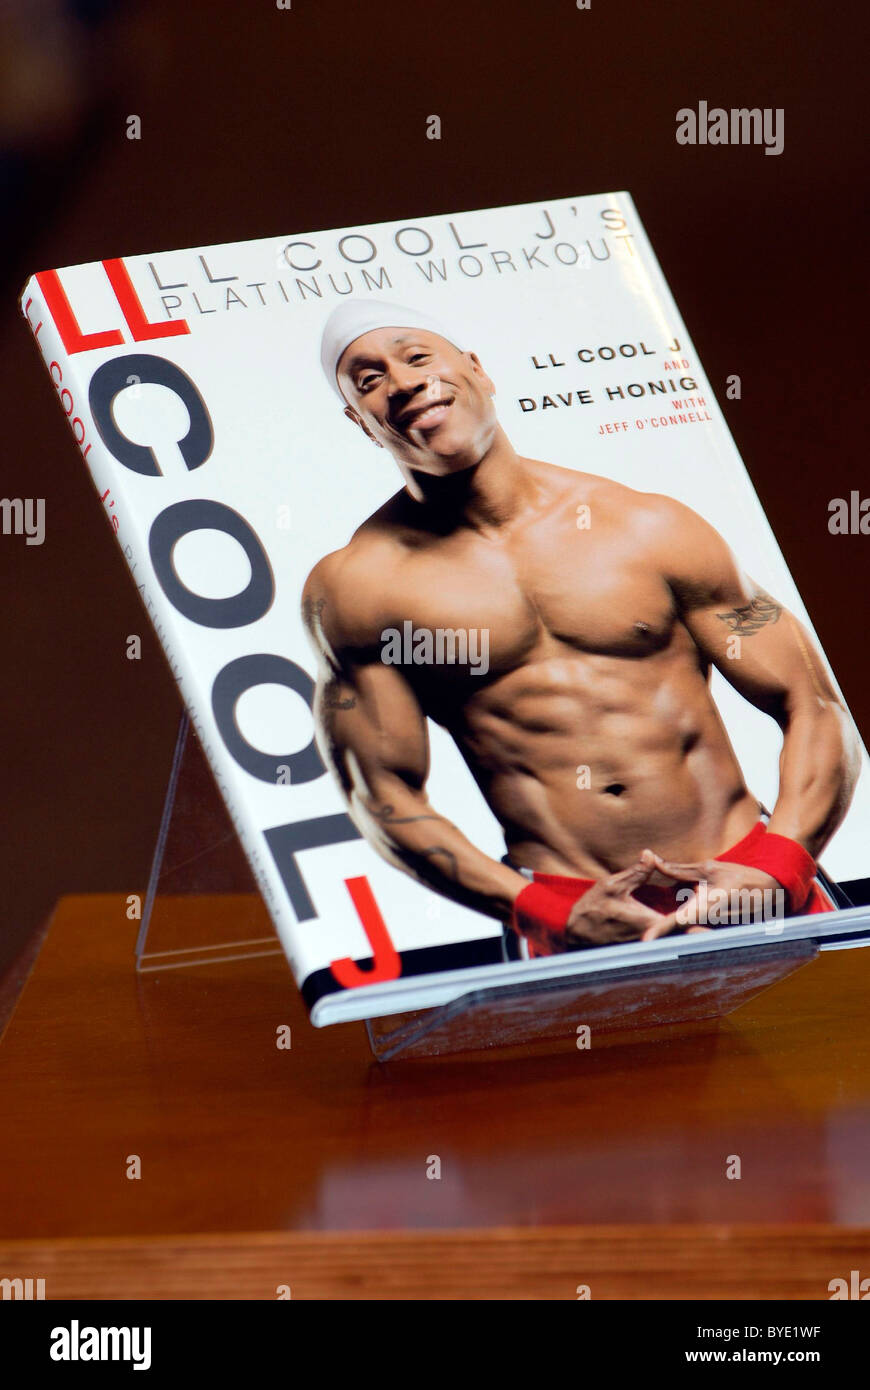 15 Minute Ll cool j platinum workout download for at Office